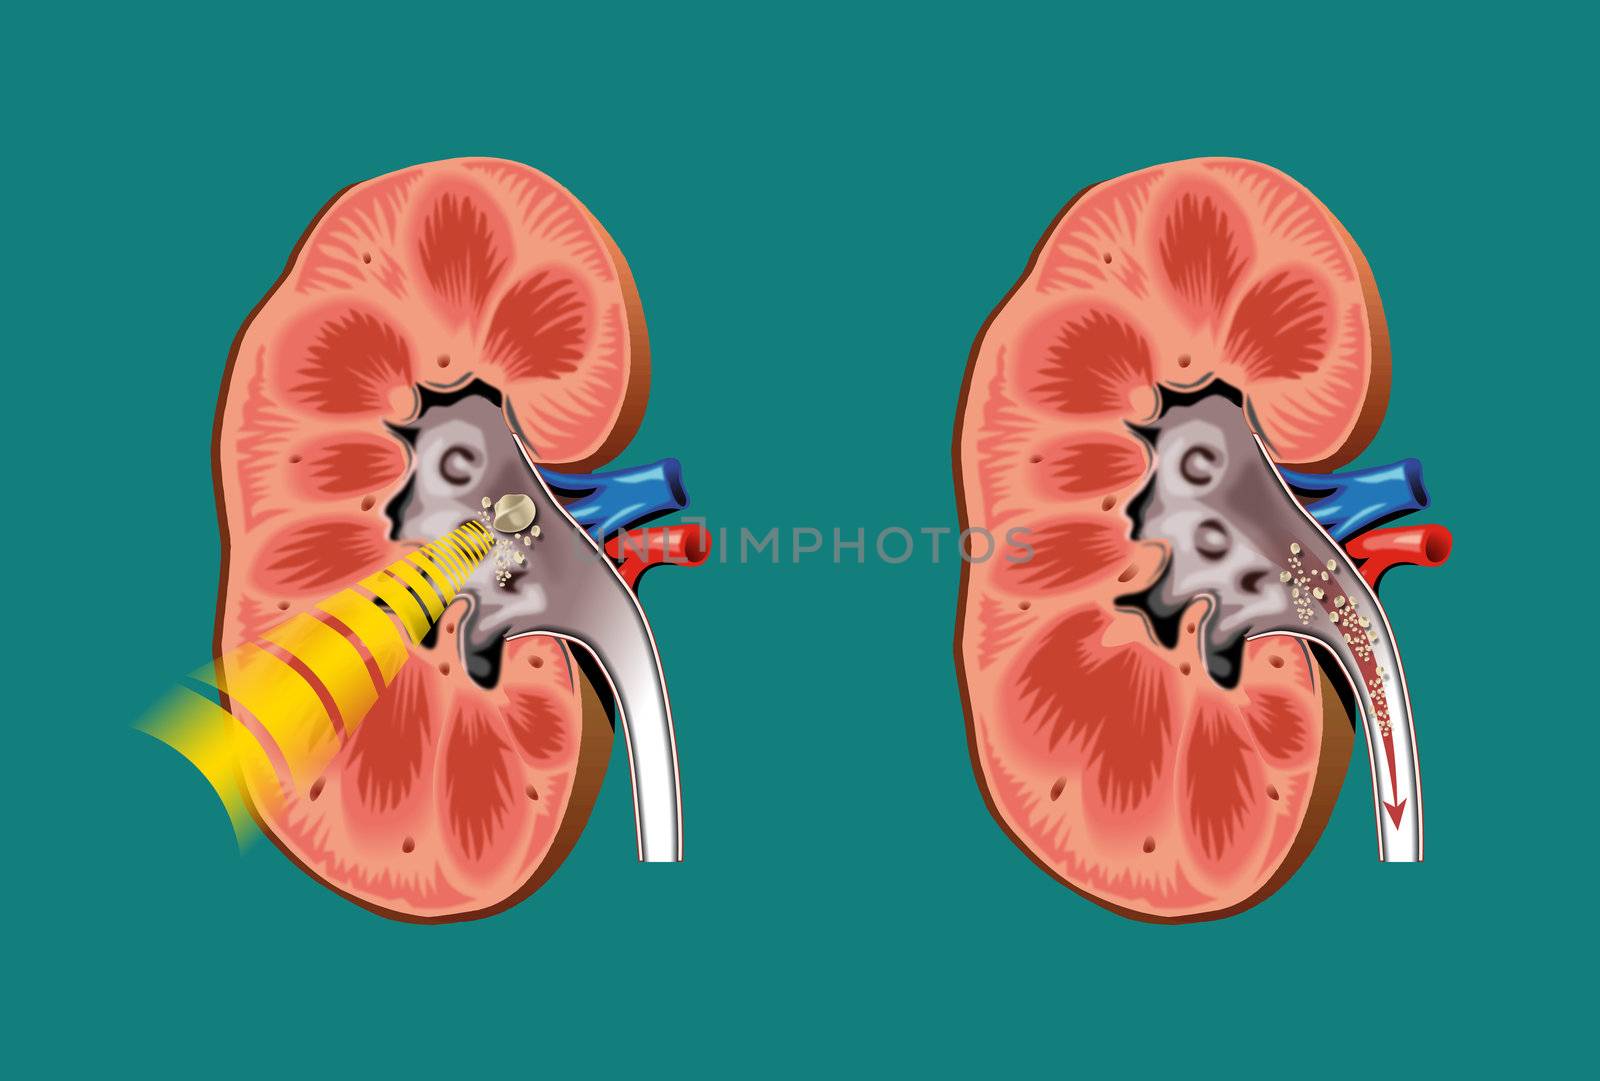 Schematic drawing of lithotripsy in kidney stones